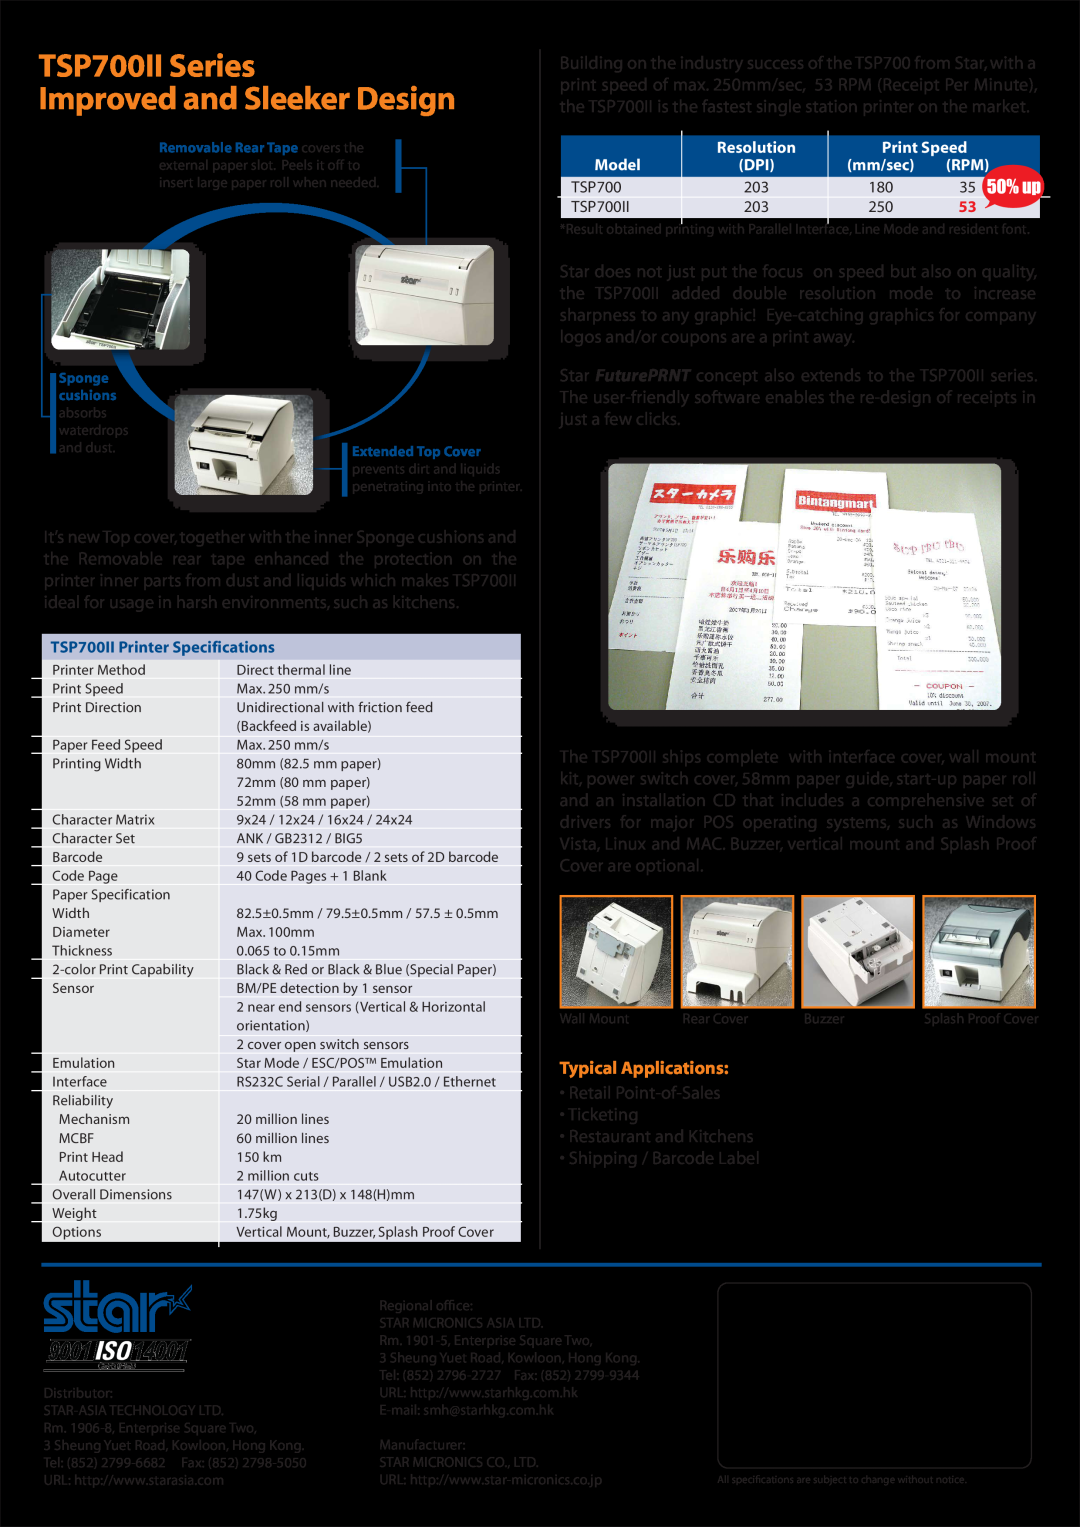 Star Micronics manual TSP700II Series Improved and Sleeker Design, Typical Applications 